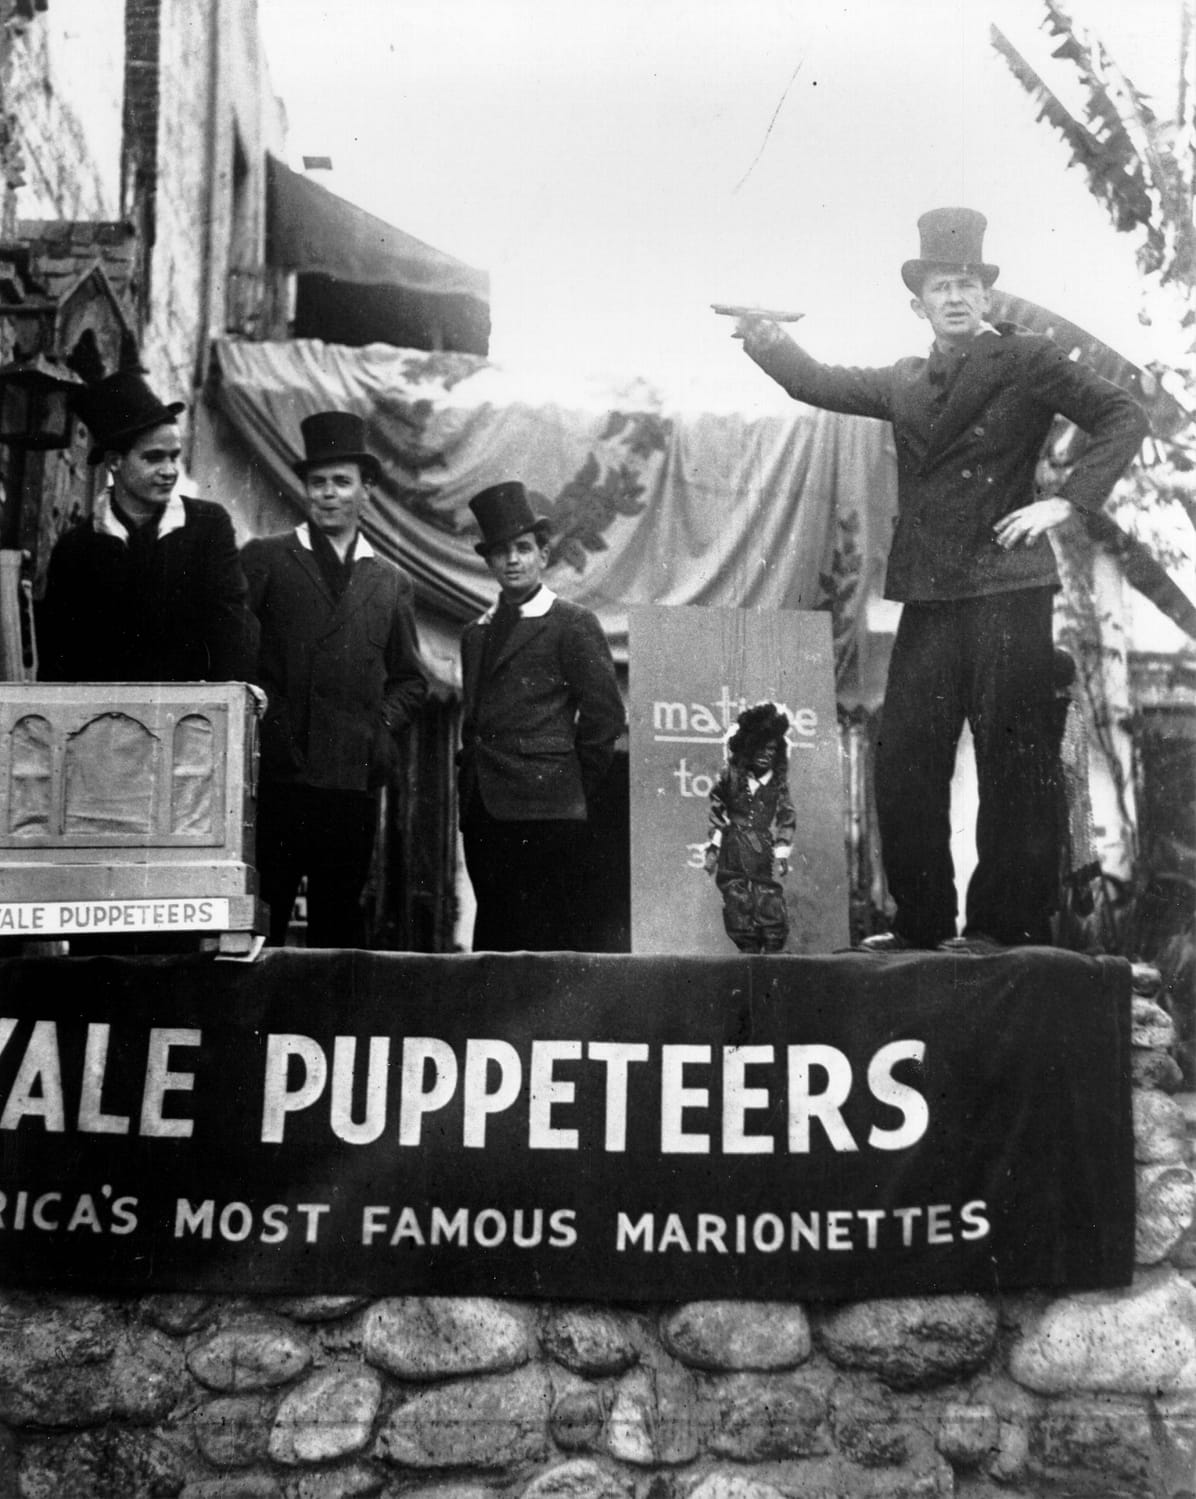 The Yale Puppeteers and Beverly Brown attracting customers with "Douglas Fairbanks" outside of their Olvera Street theater, ca. 1930.